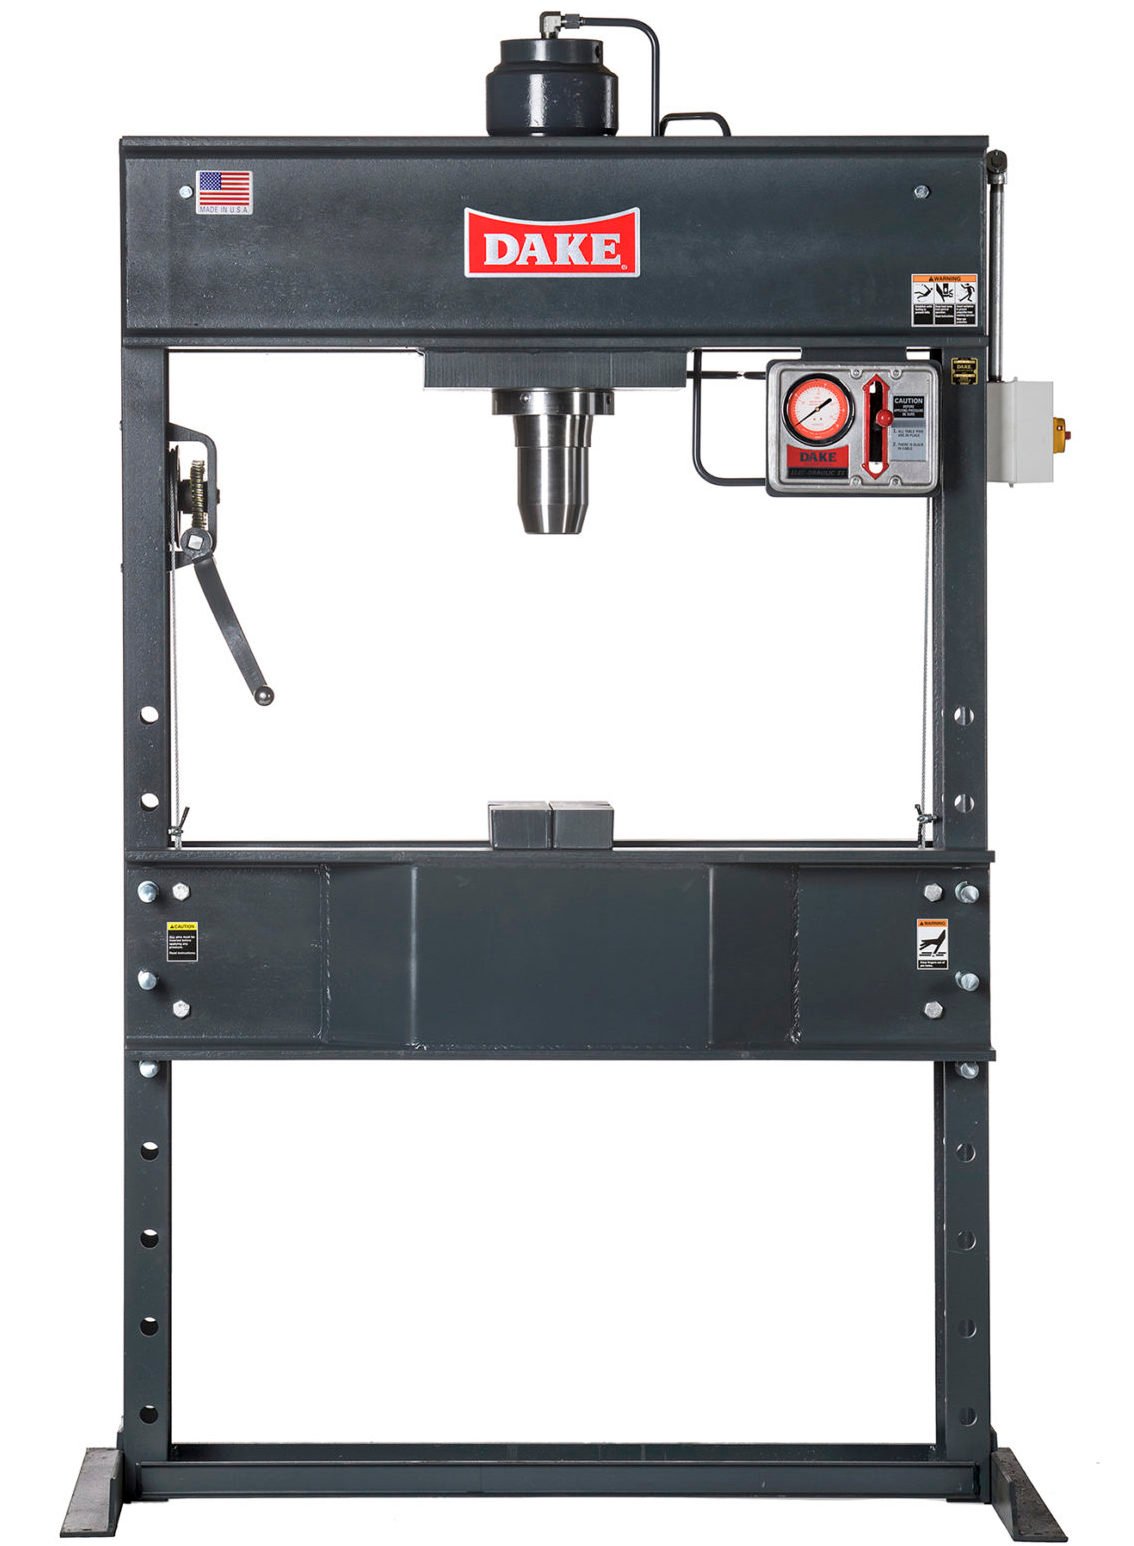 Elec-Draulic II Presses: Set Up, Trouble Shooting, And Maintenance